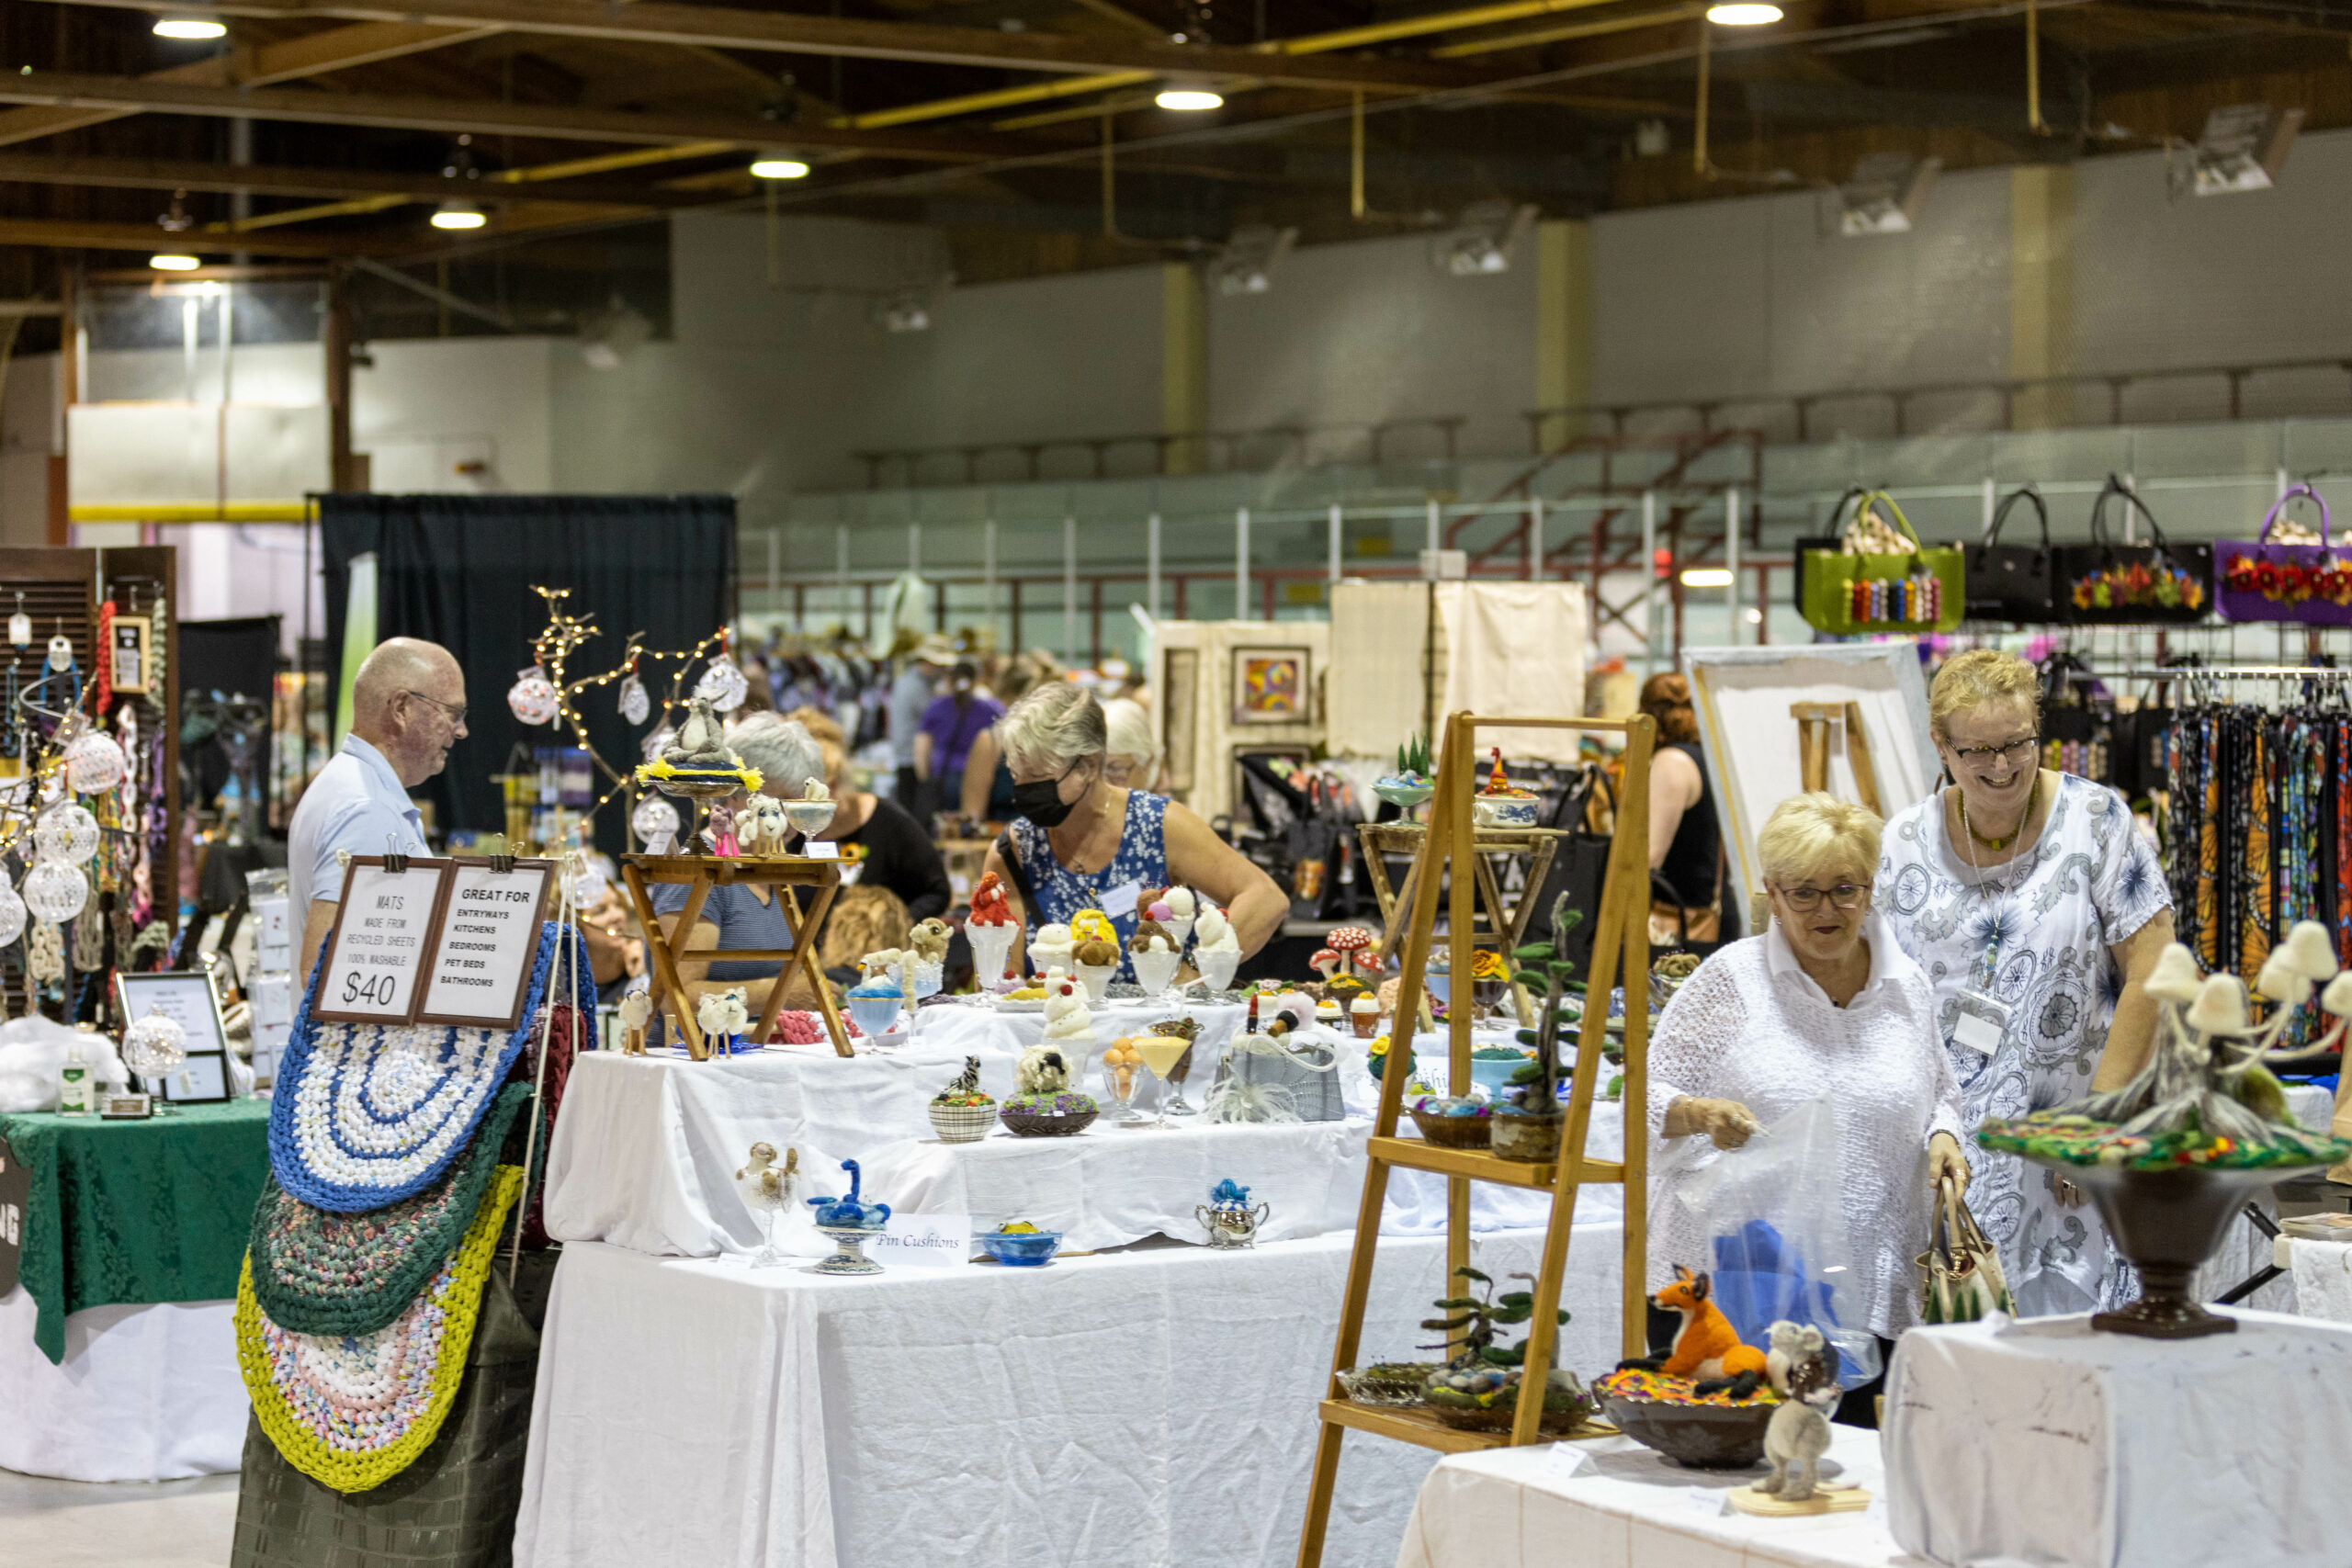 People in a large room at a market or event with many tables covered in white cloth, and many kinds of colourful object for sale including bags, ceramics, and fabric mats